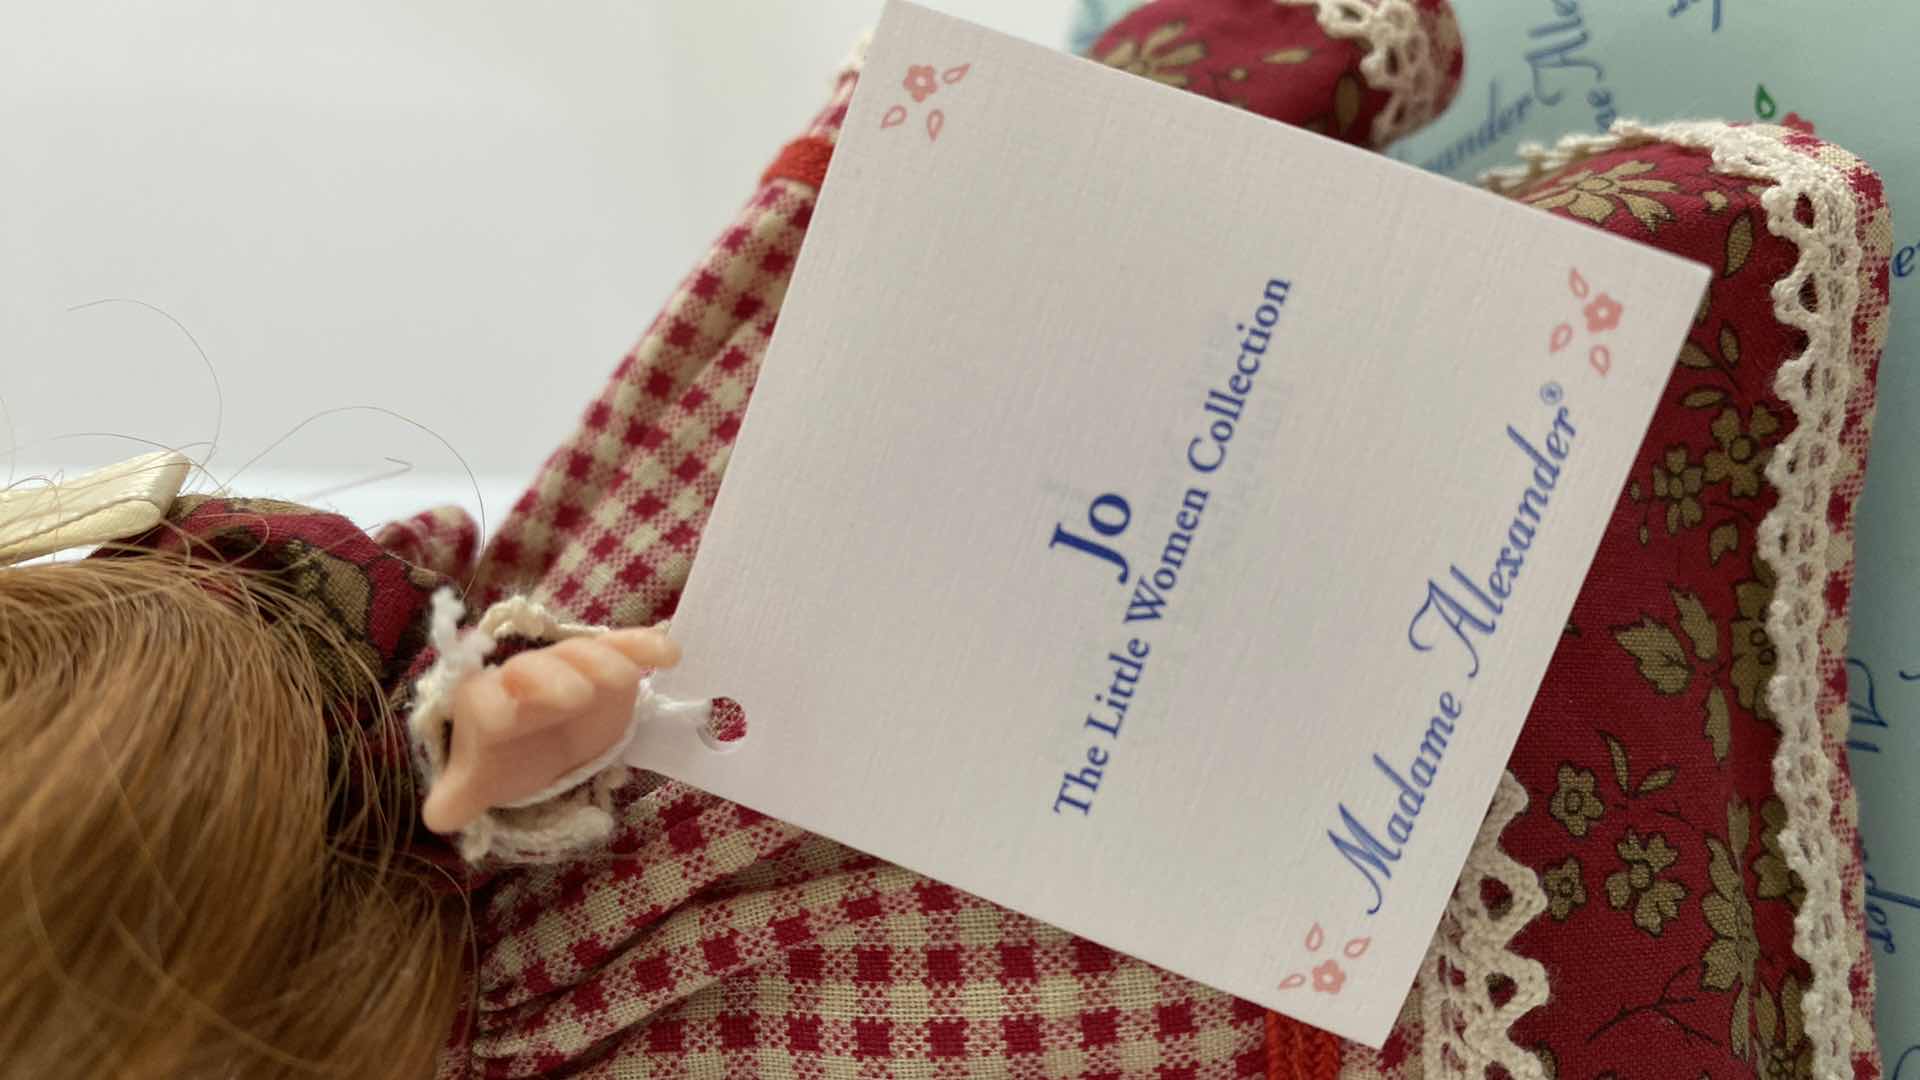 Photo 5 of MADAME ALEXANDER COLLECTIBLE LITTLE WOMEN JO 28140 H8” FROM FAO SCHWARZ WITH BOX